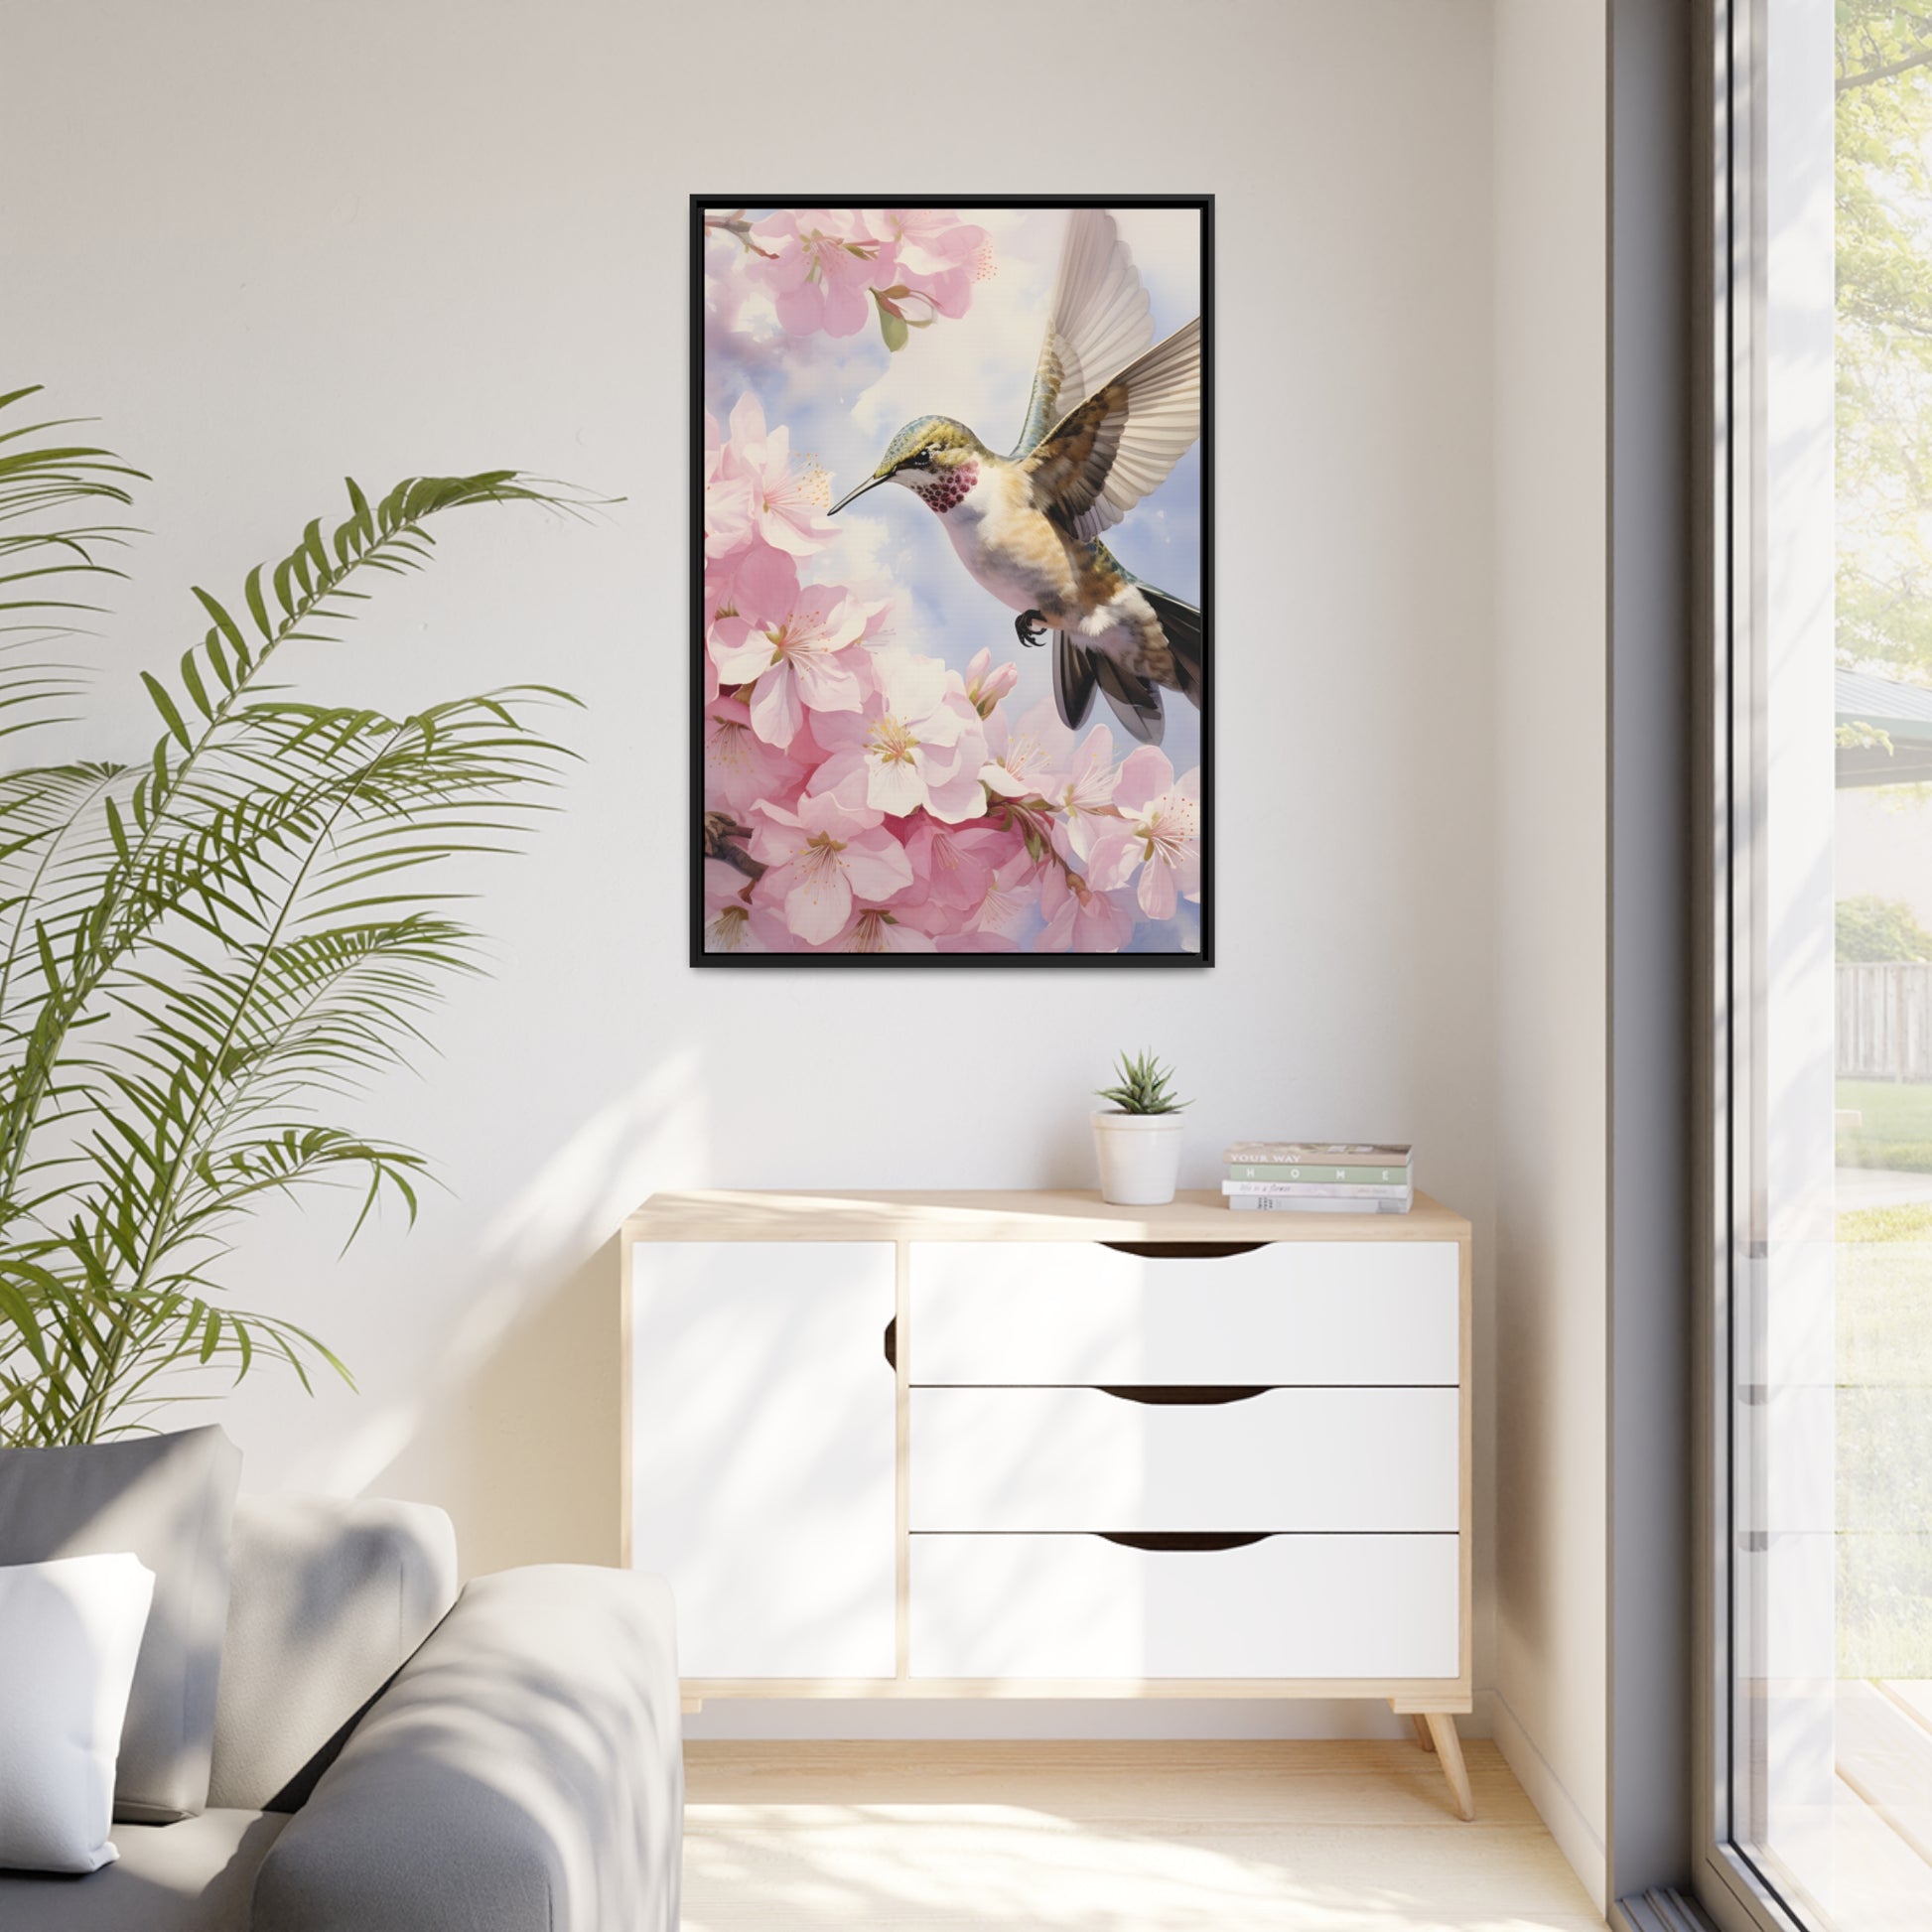 Framed Canvas Artwork Humming Bird Hovering Mid Air While Seeking Out Fresh Honey Amongst The Cherry Blossoms Framed Canvas Artwork